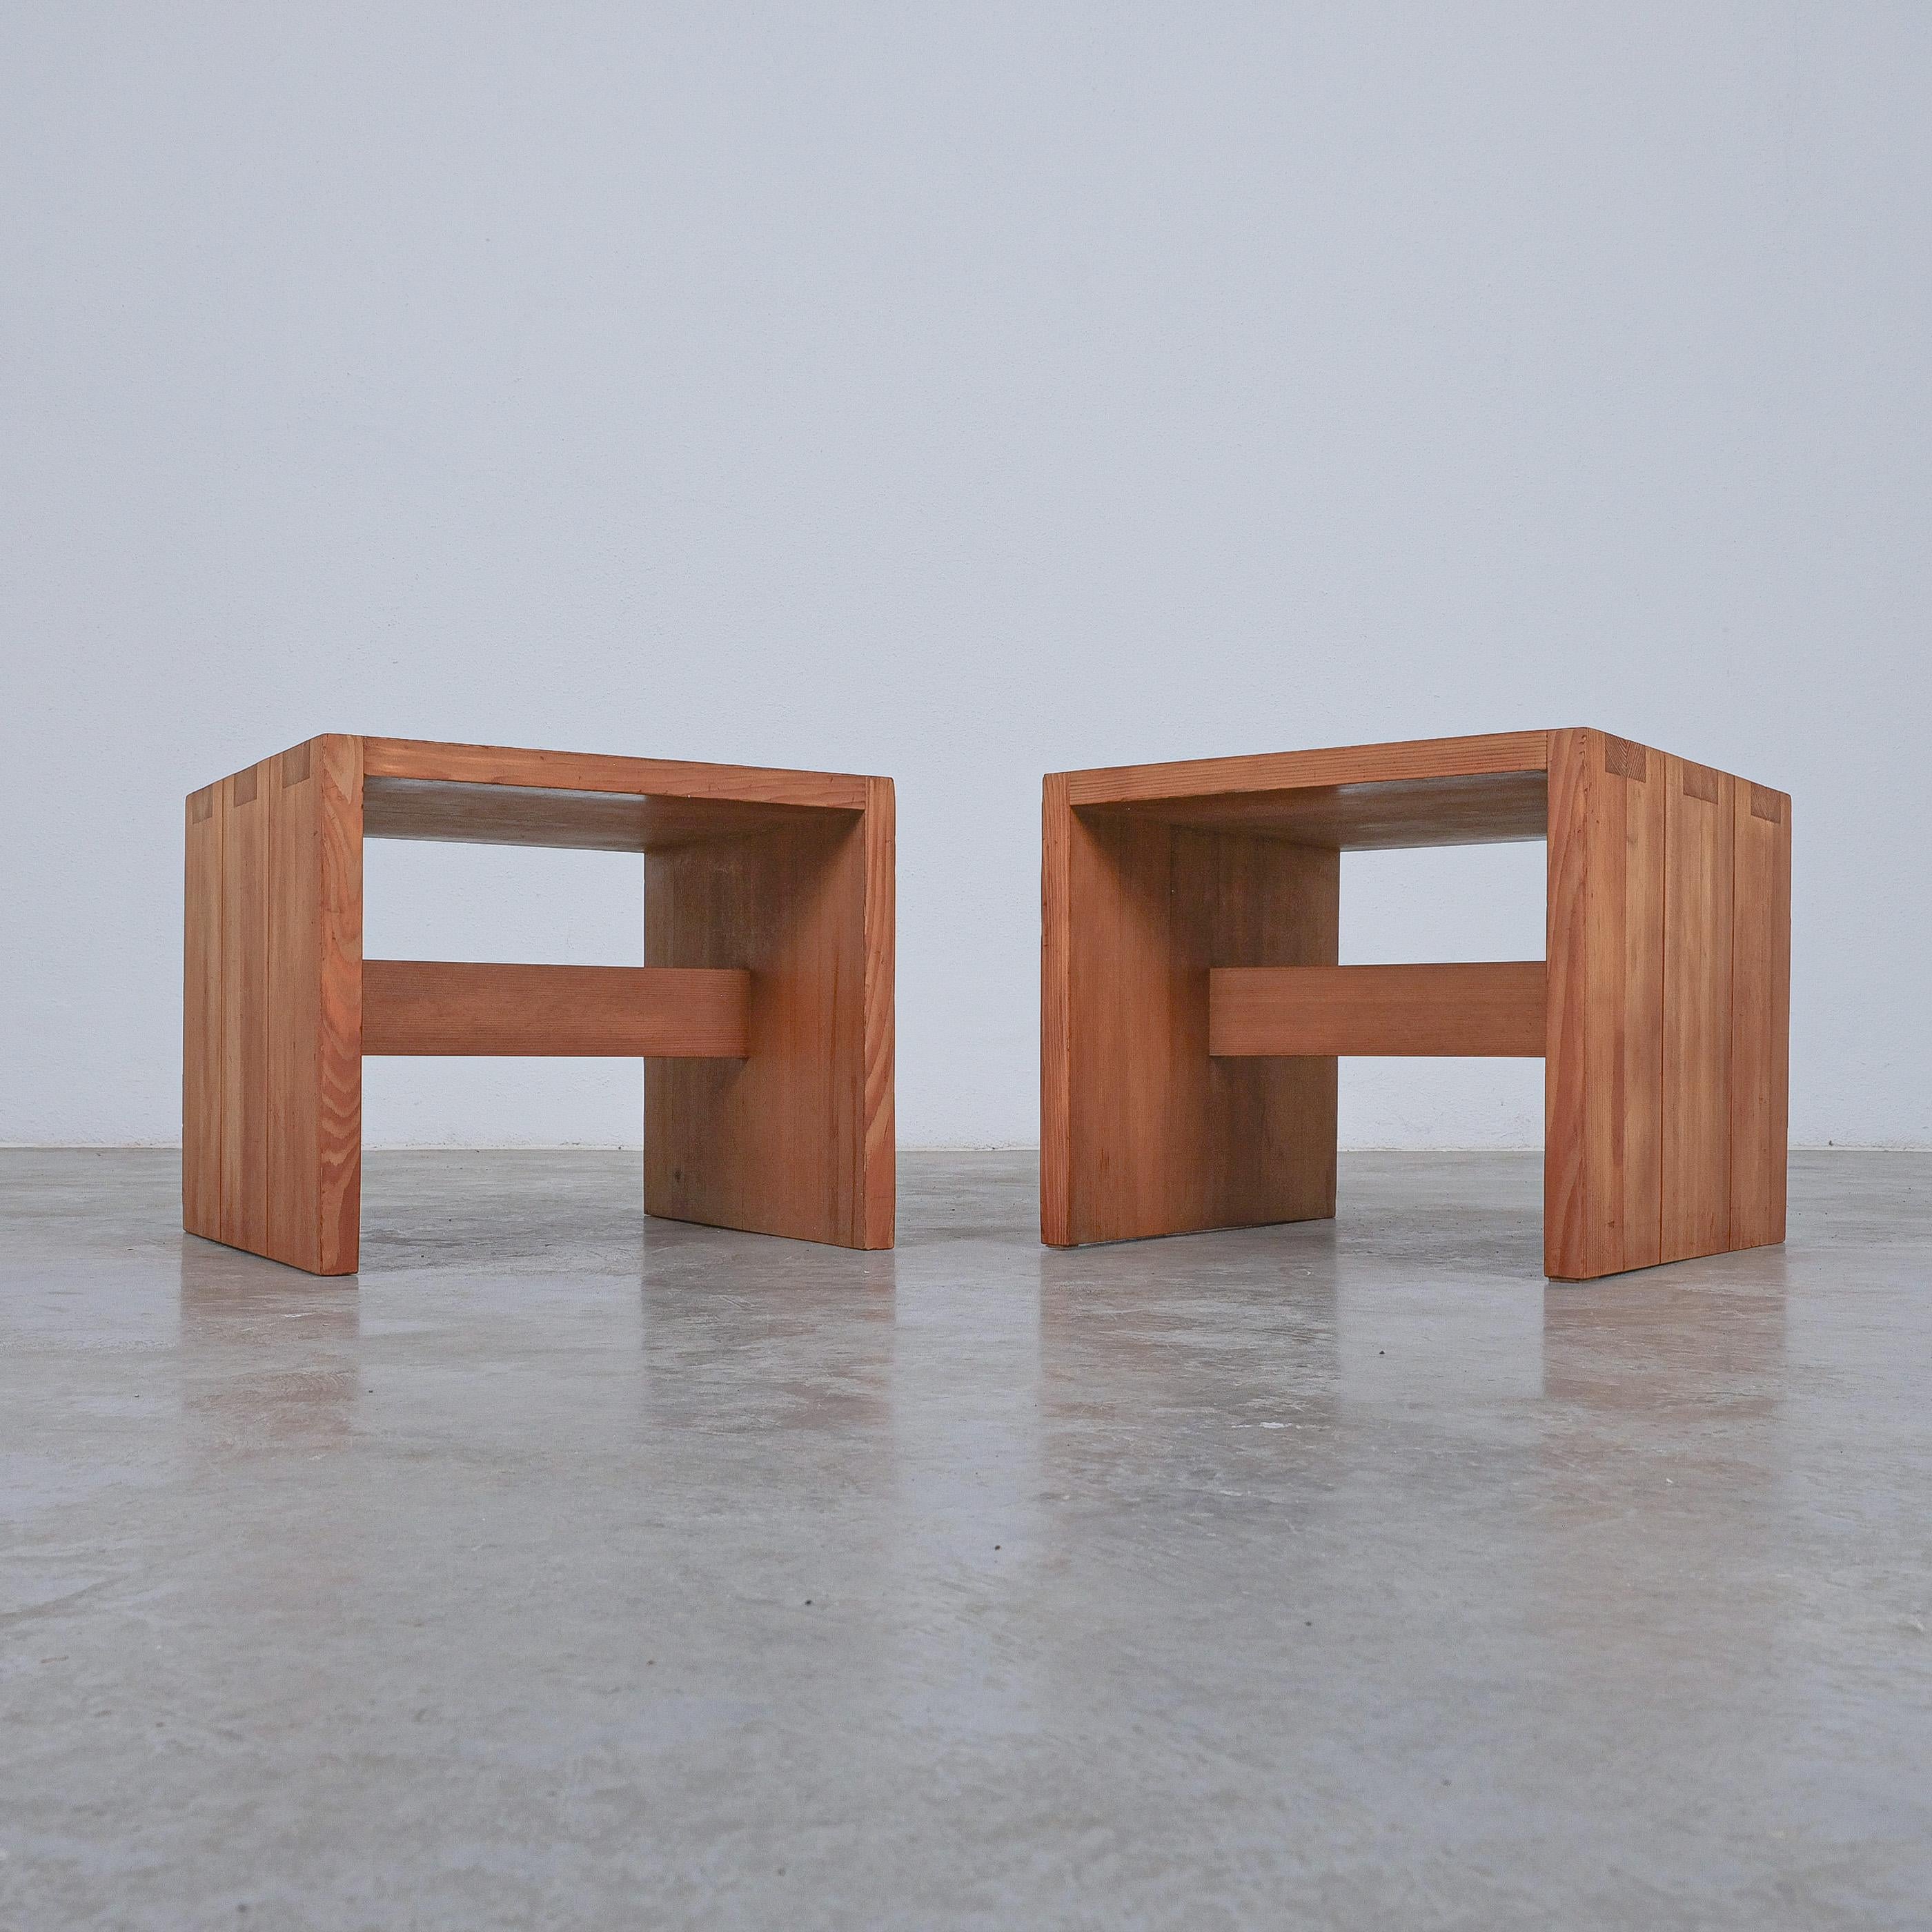 Pair of Pine Wood Side Tables Style of Charlotte Perriand, 1960 France

Nice pair of pine tables in the style of Charlotte Perriand. These sturdy tables work perfectly as side tables or nightstands, priced as a pair. They are Identical in size and